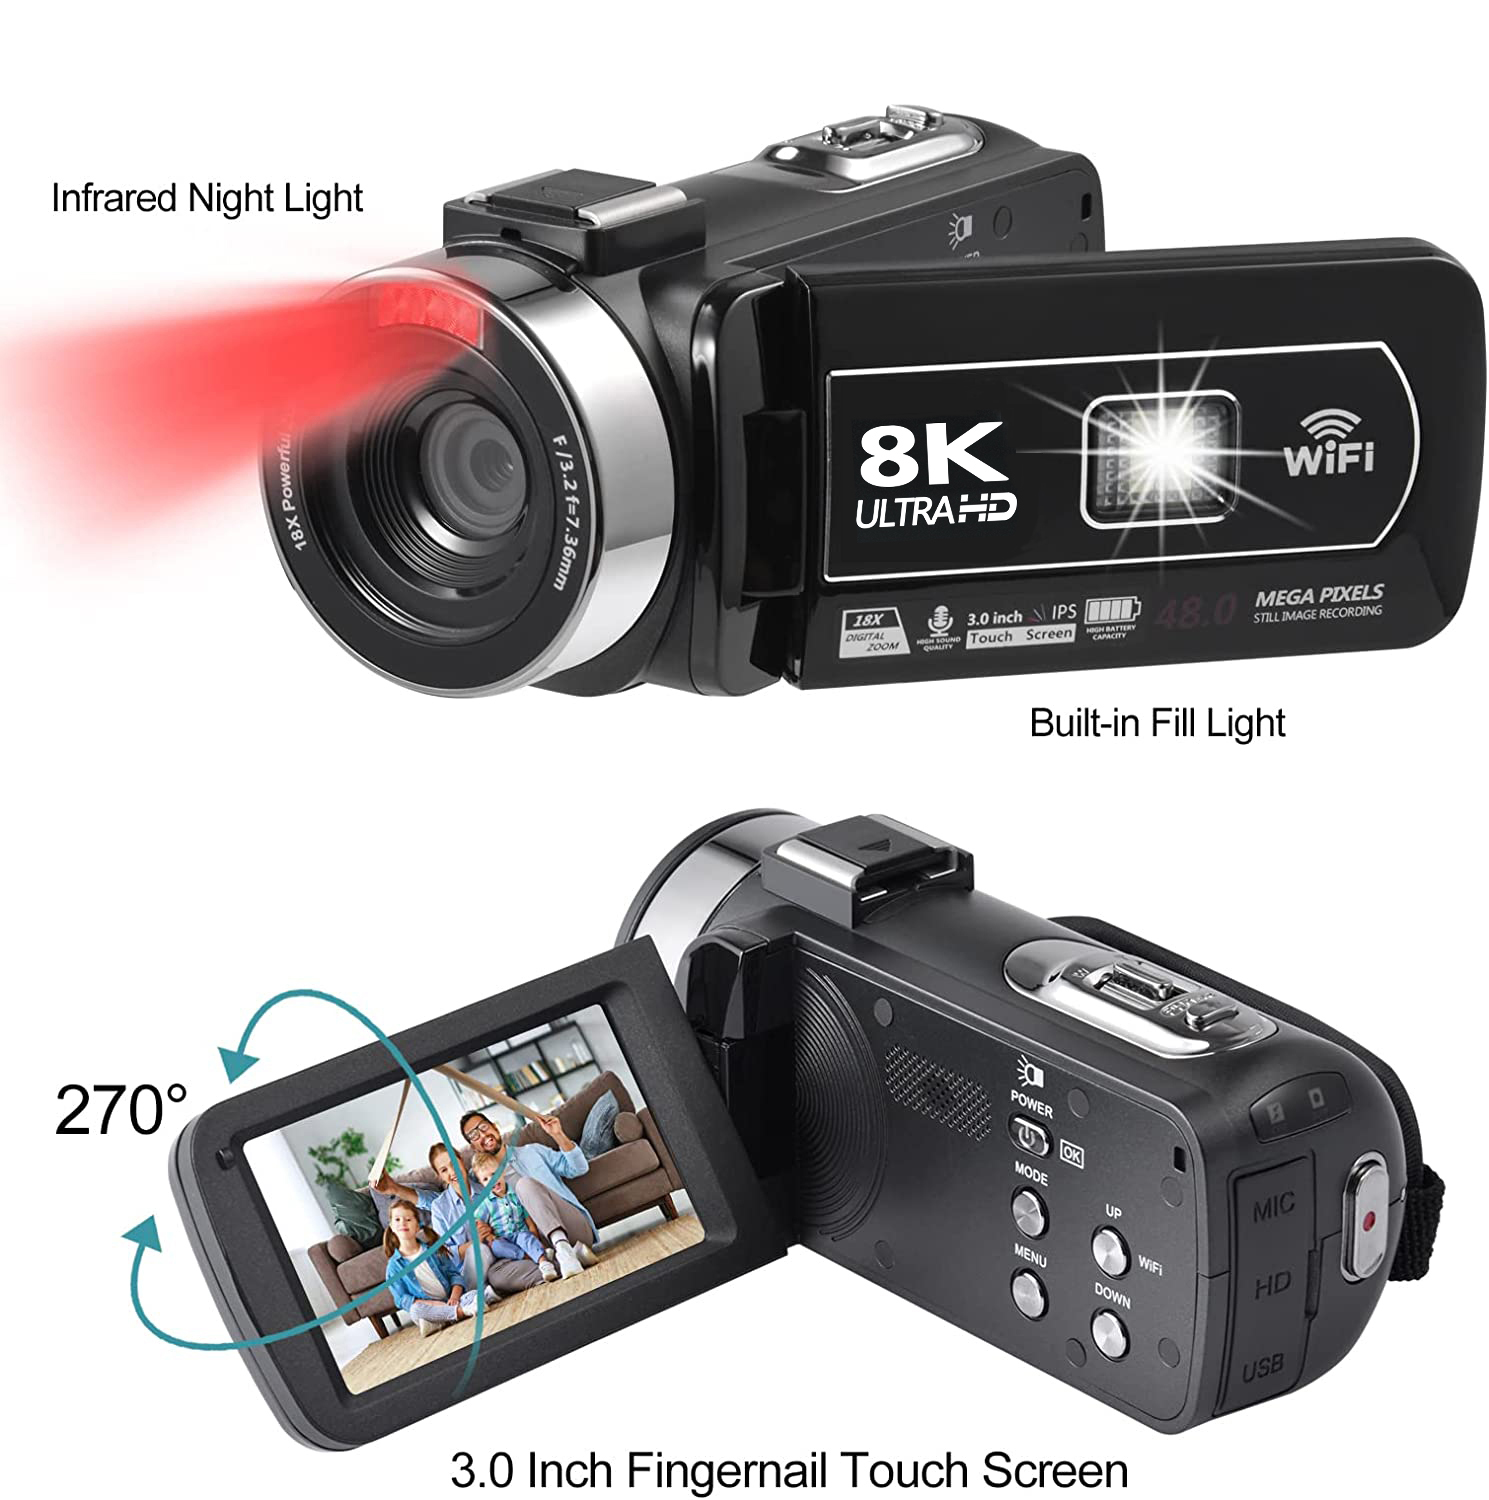 Unleash Your Creativity with AC-258KM Digital Camera: CMOS 13MP Sensor, Expandable up to 48MP for Stunning Image Quality